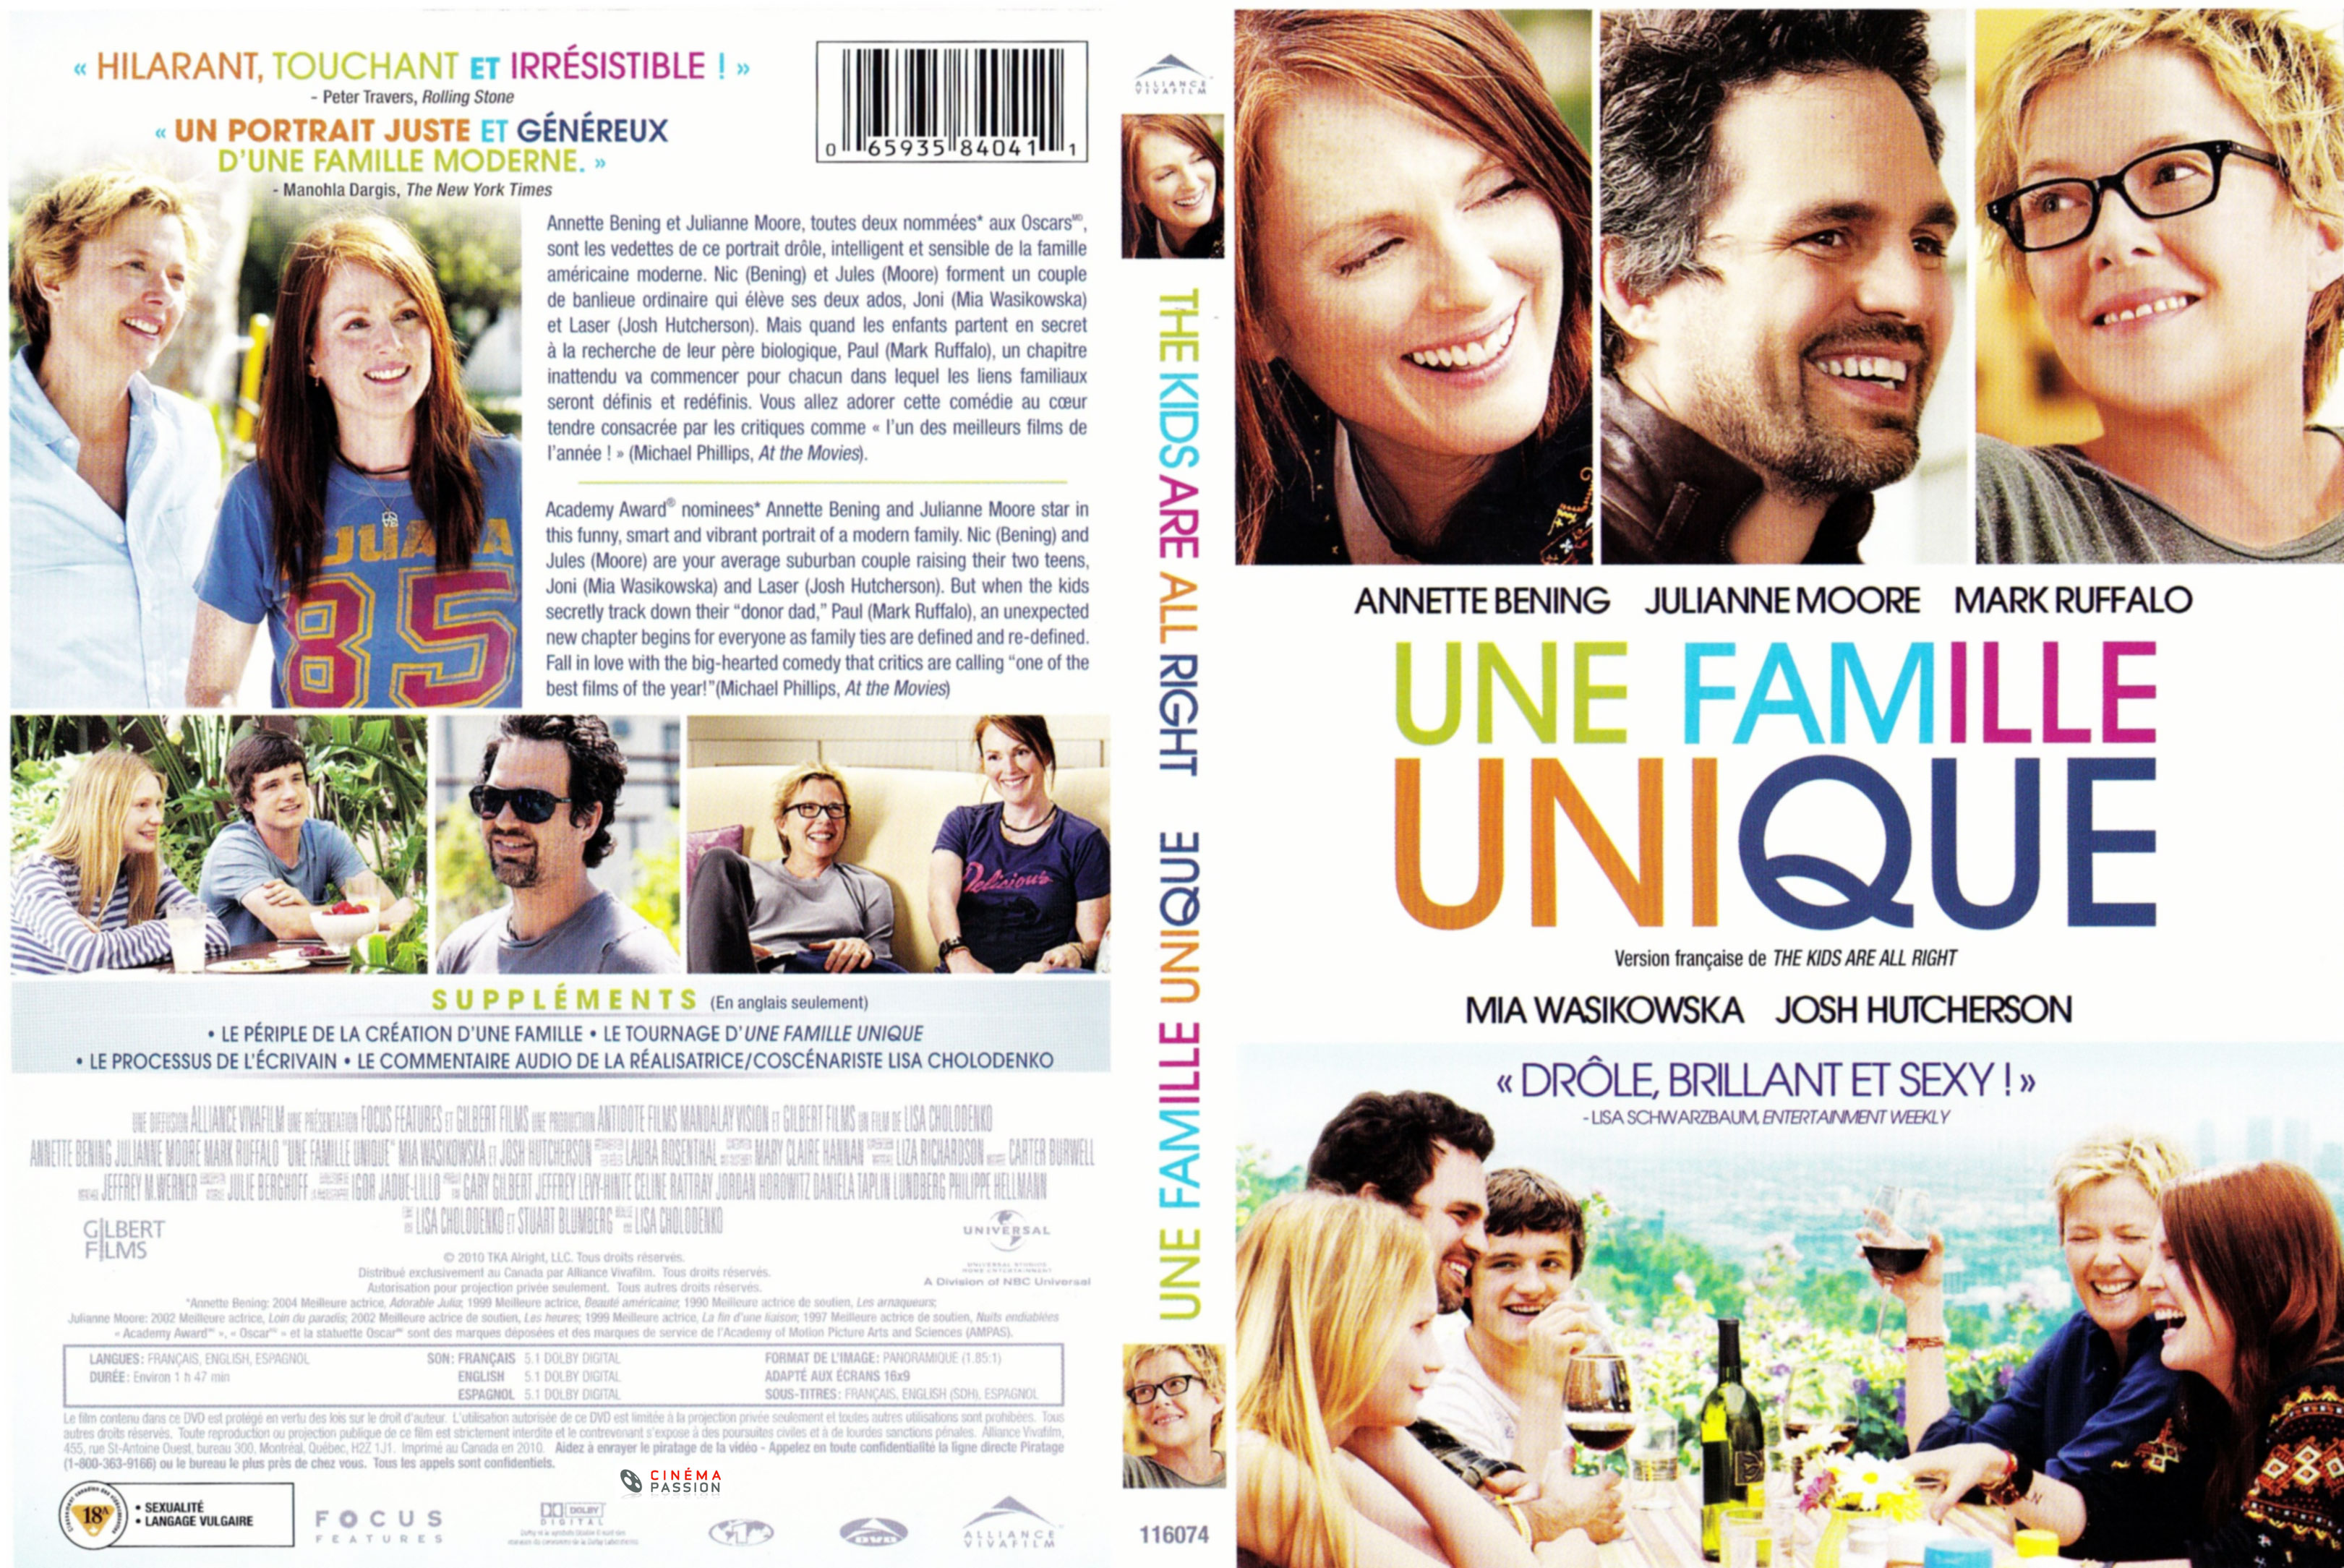 Jaquette DVD Une famille unique - The kids are all right (Canadienne)